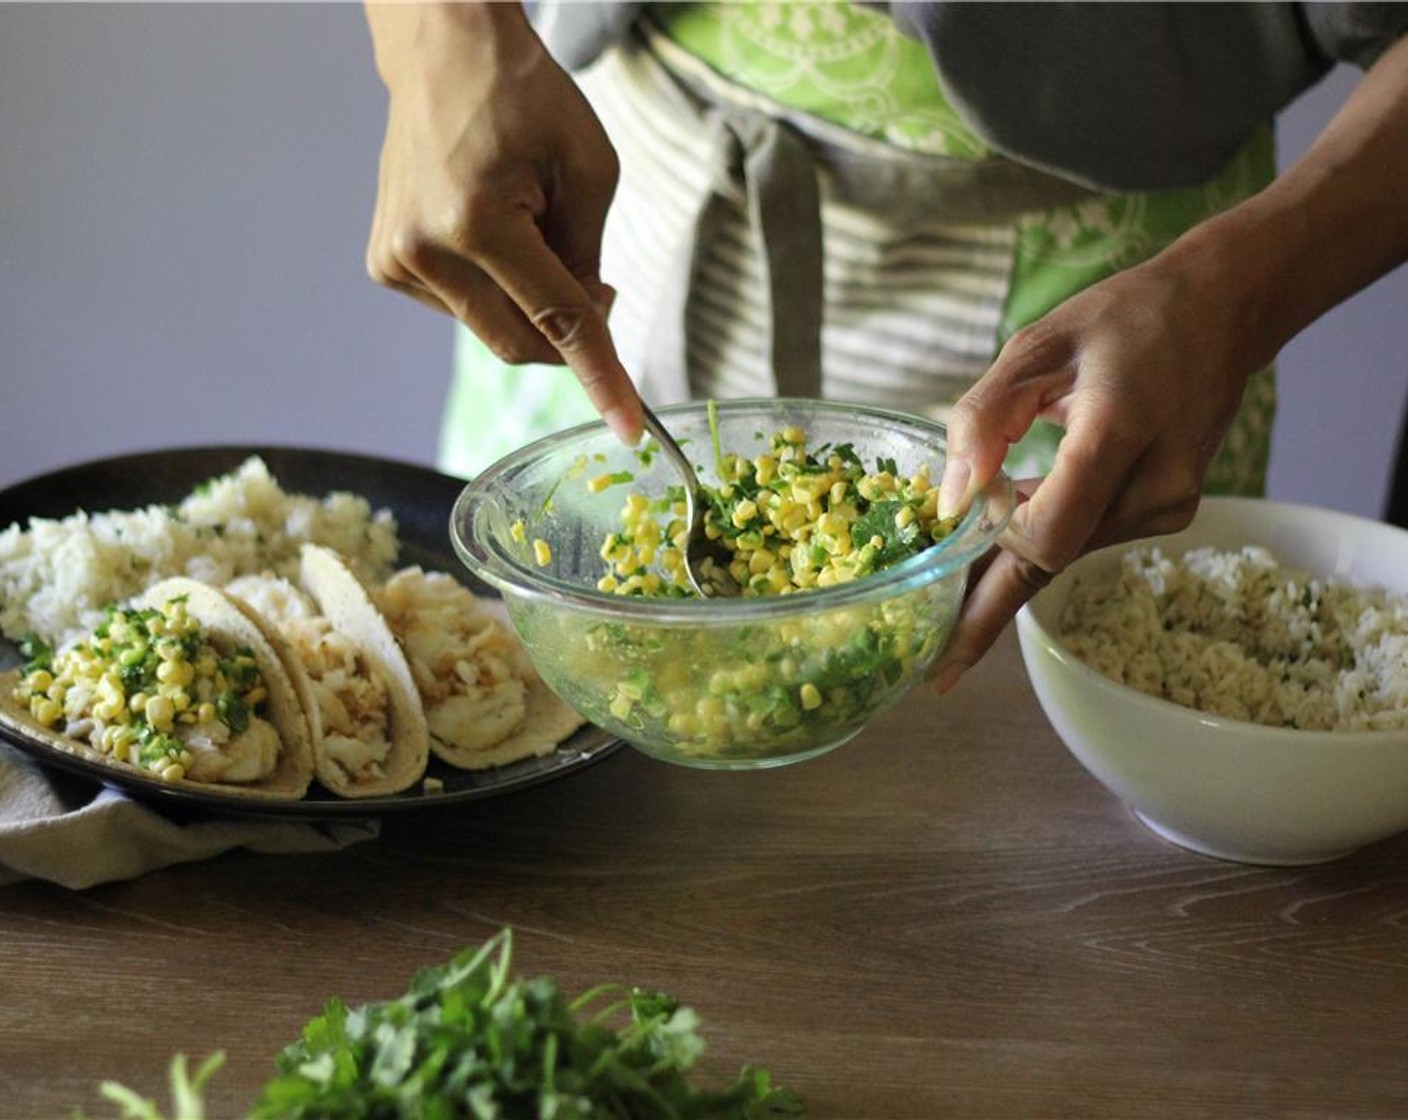 step 8 To assemble tacos, place a few pieces of the flaked fish into a warmed Tortillas (4), top with spoon full corn ceviche and extra cilantro if desired.